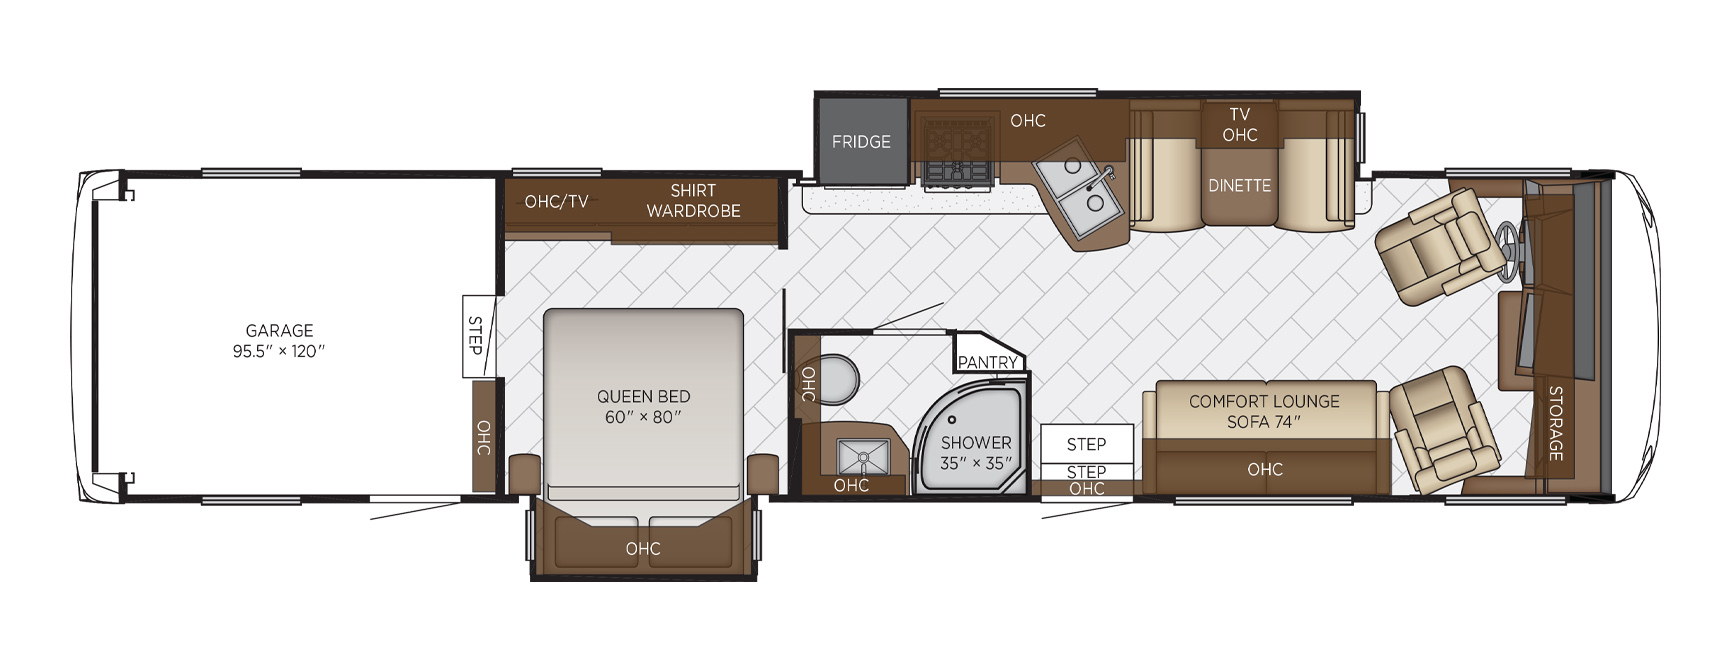 2021 Newmar Canyon Star 3927 (Front Engine Diesel) Floor Plan